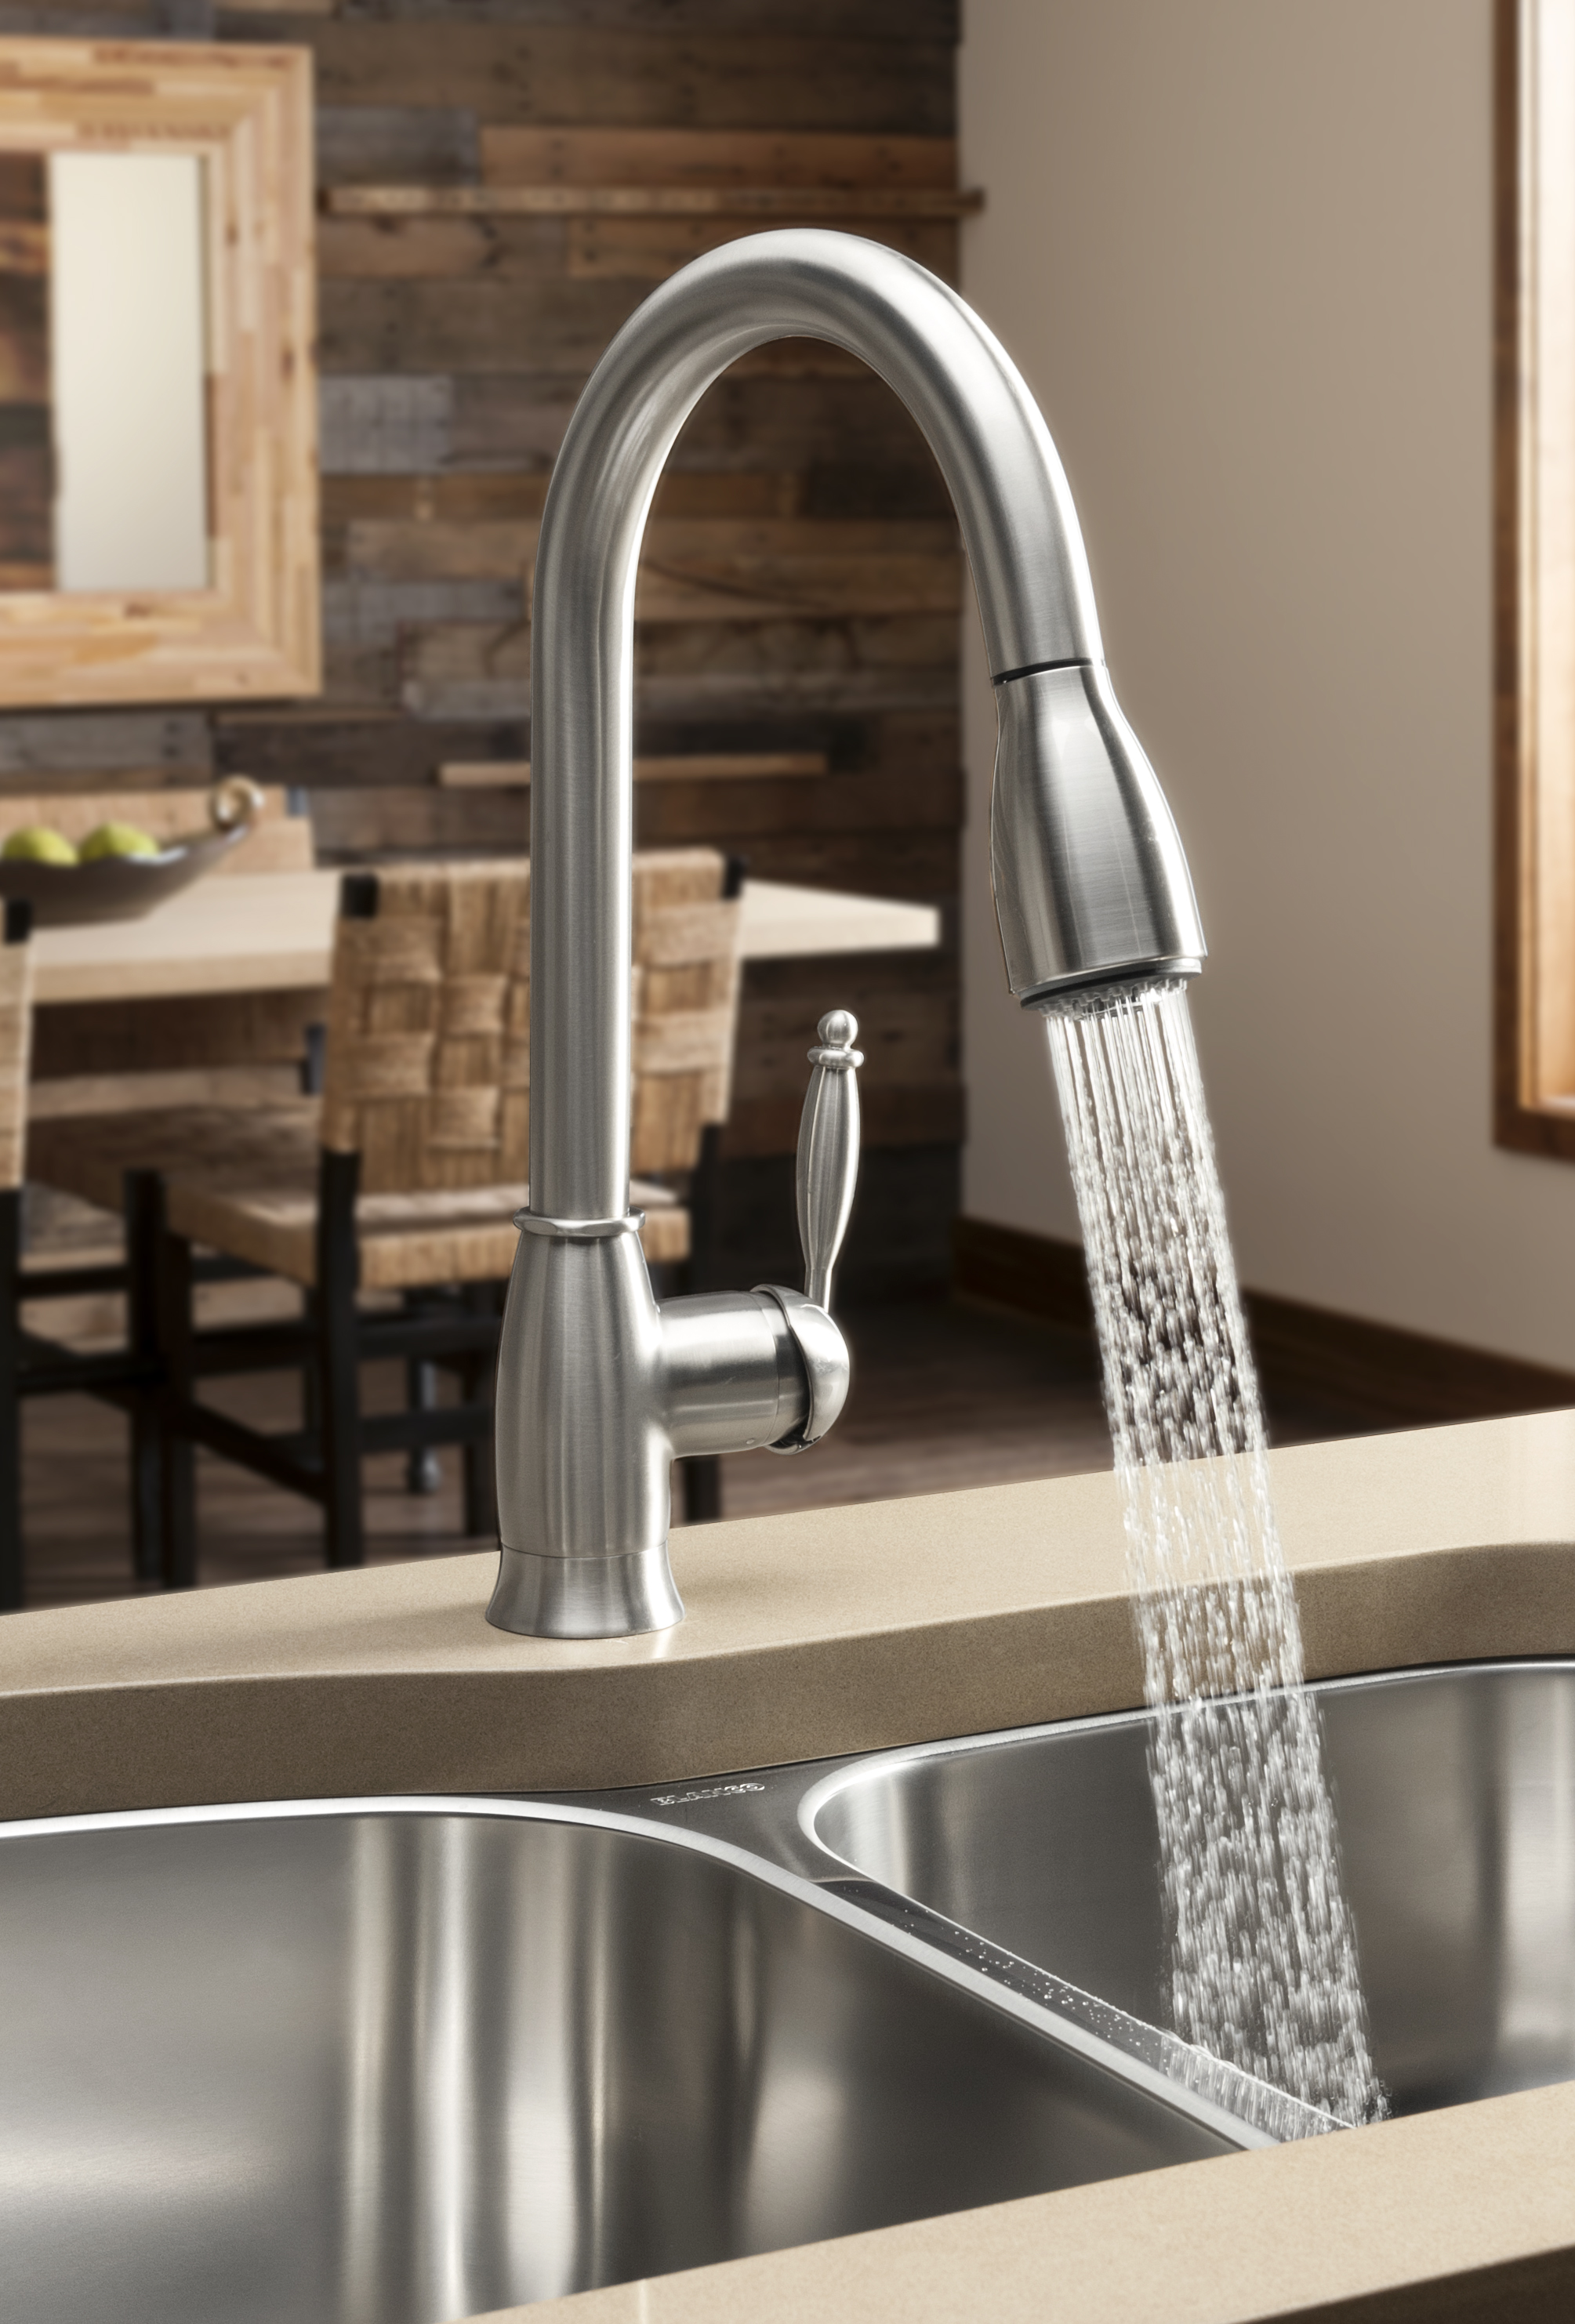 BLANCO Makes a Splash with New Water-saving Kitchen Faucet Collection